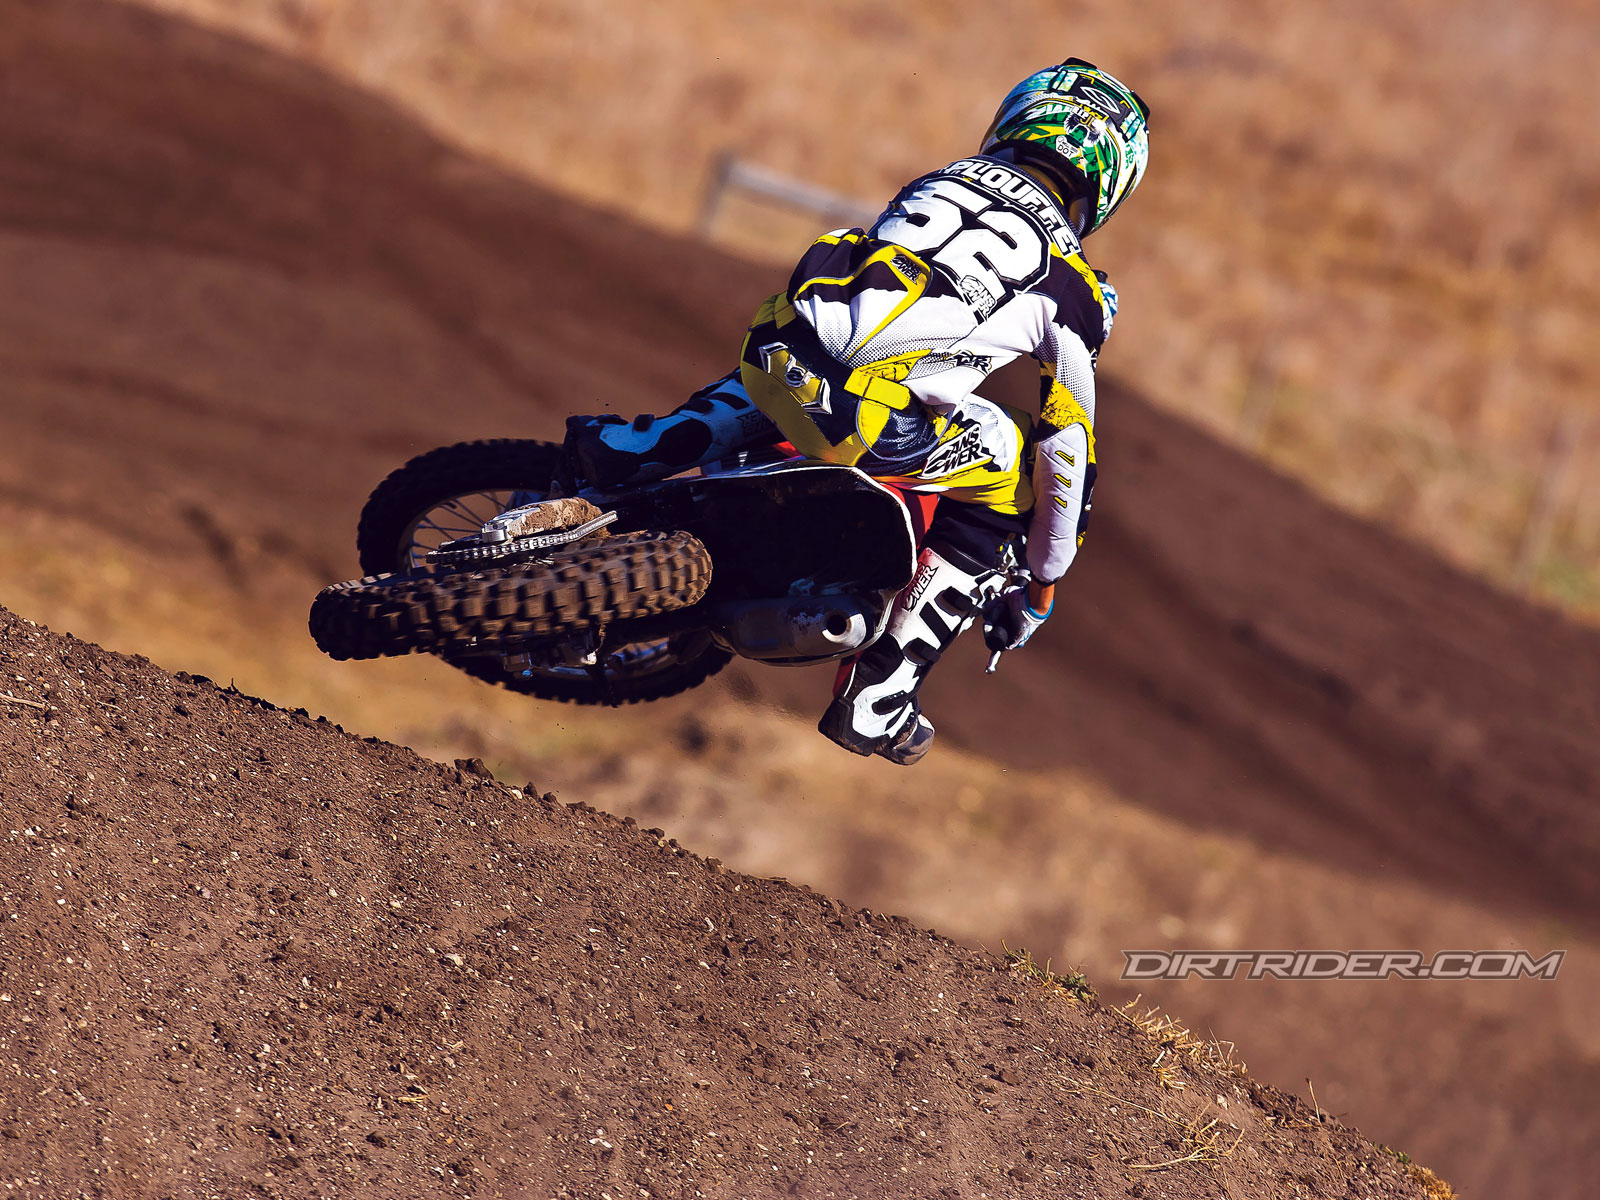 Dirt Bike Wallpaper Clickandseeworld Is All About Funny